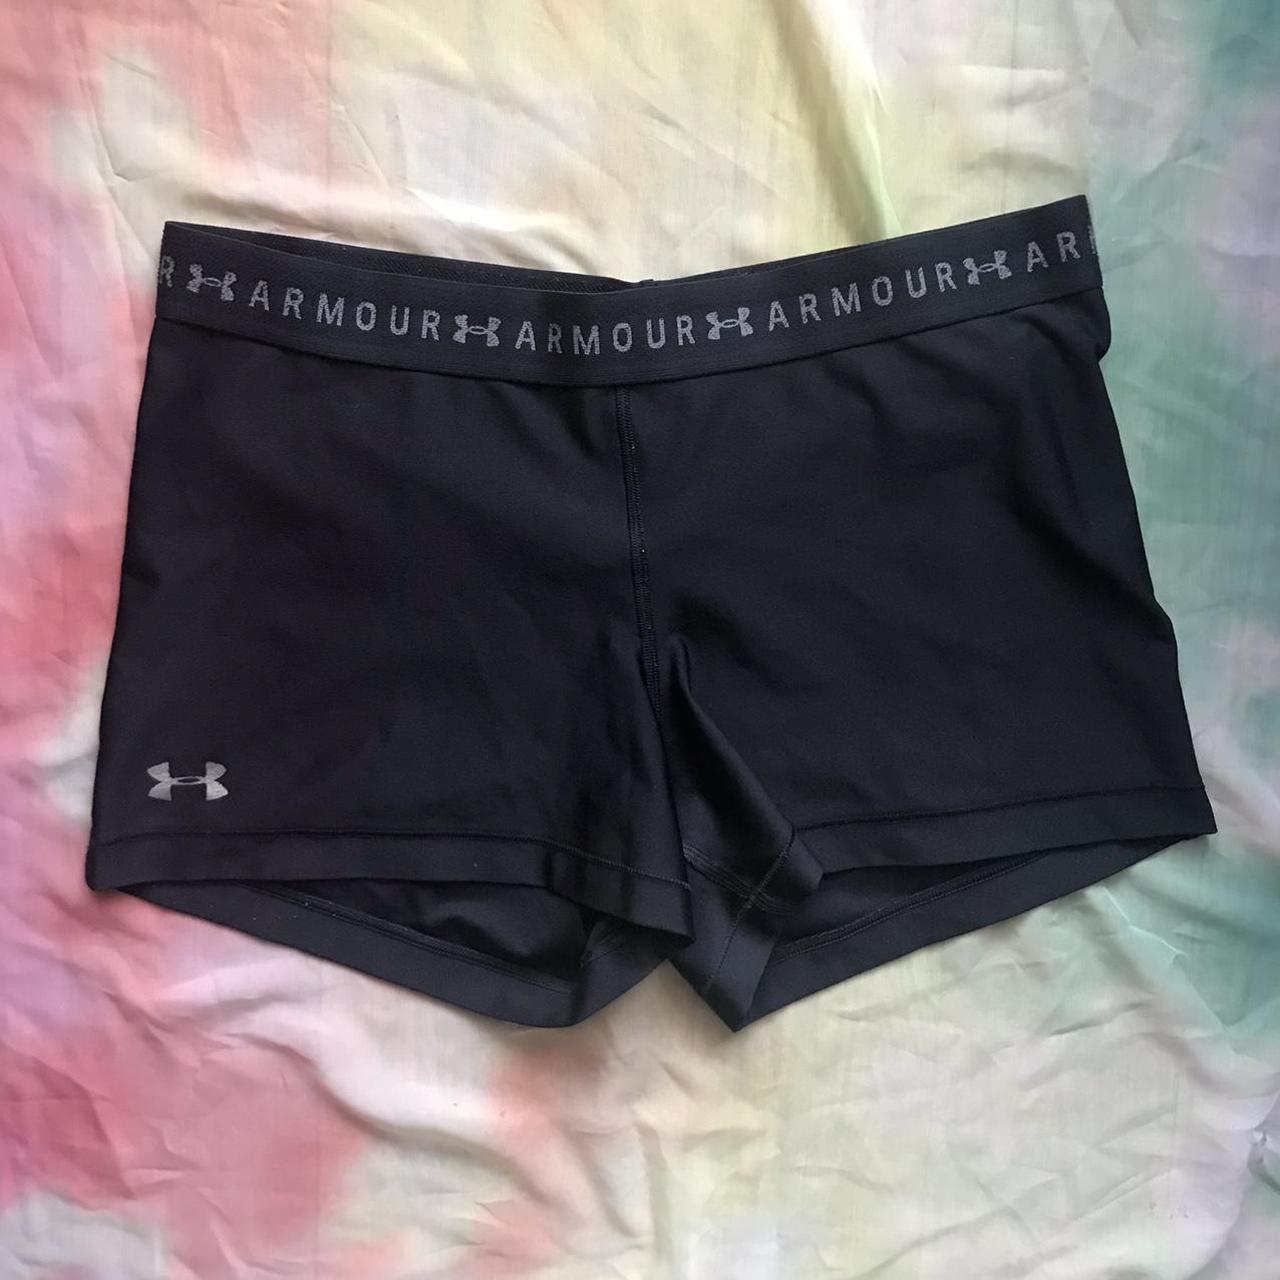 Product Image 1 - Under Armour Black Shorts 🖤

No